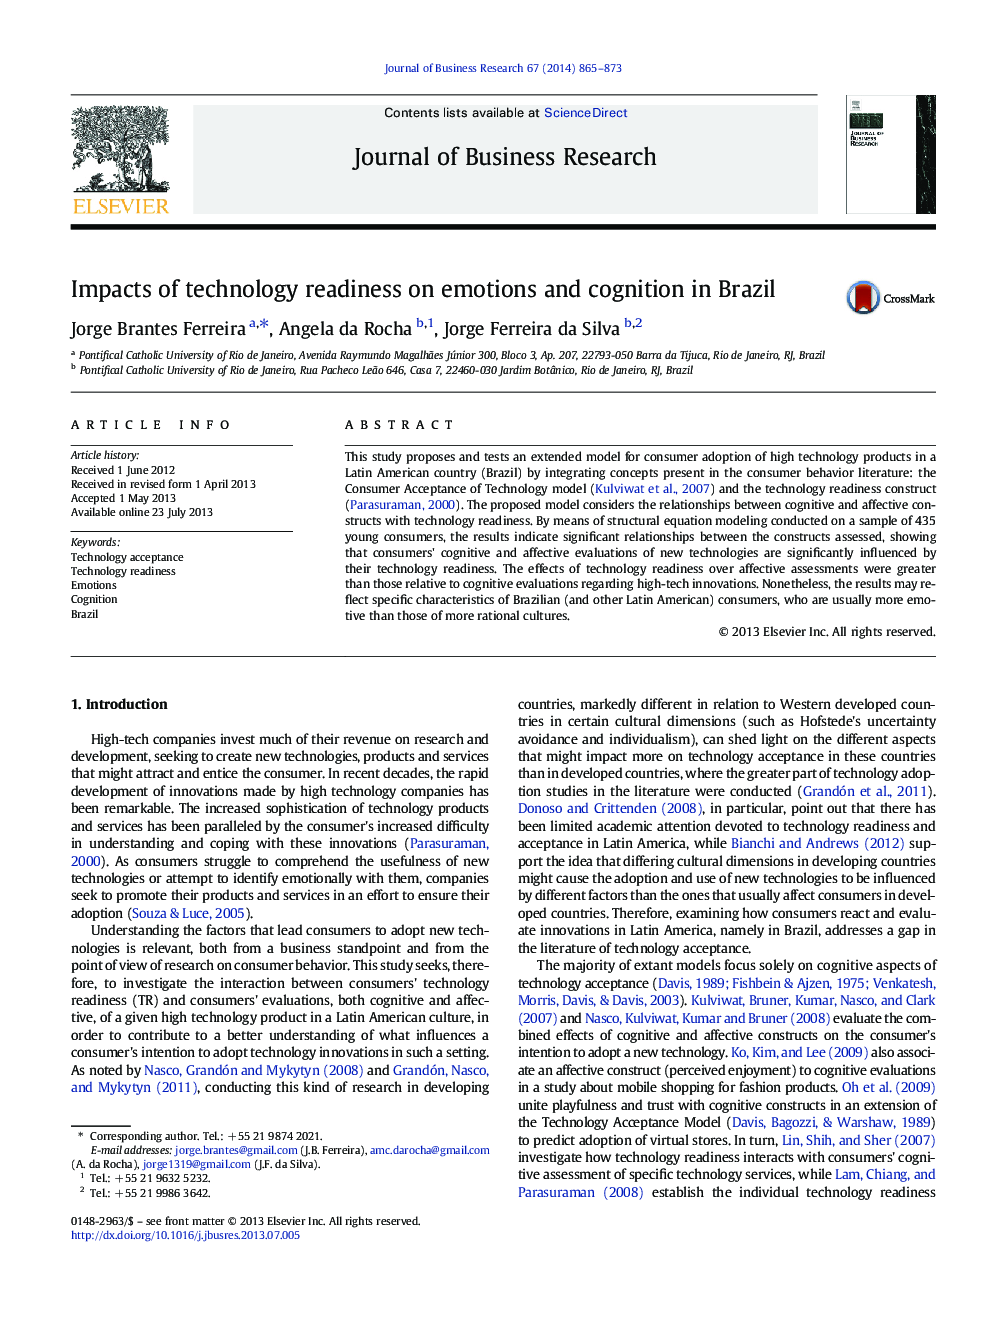 Impacts of technology readiness on emotions and cognition in Brazil